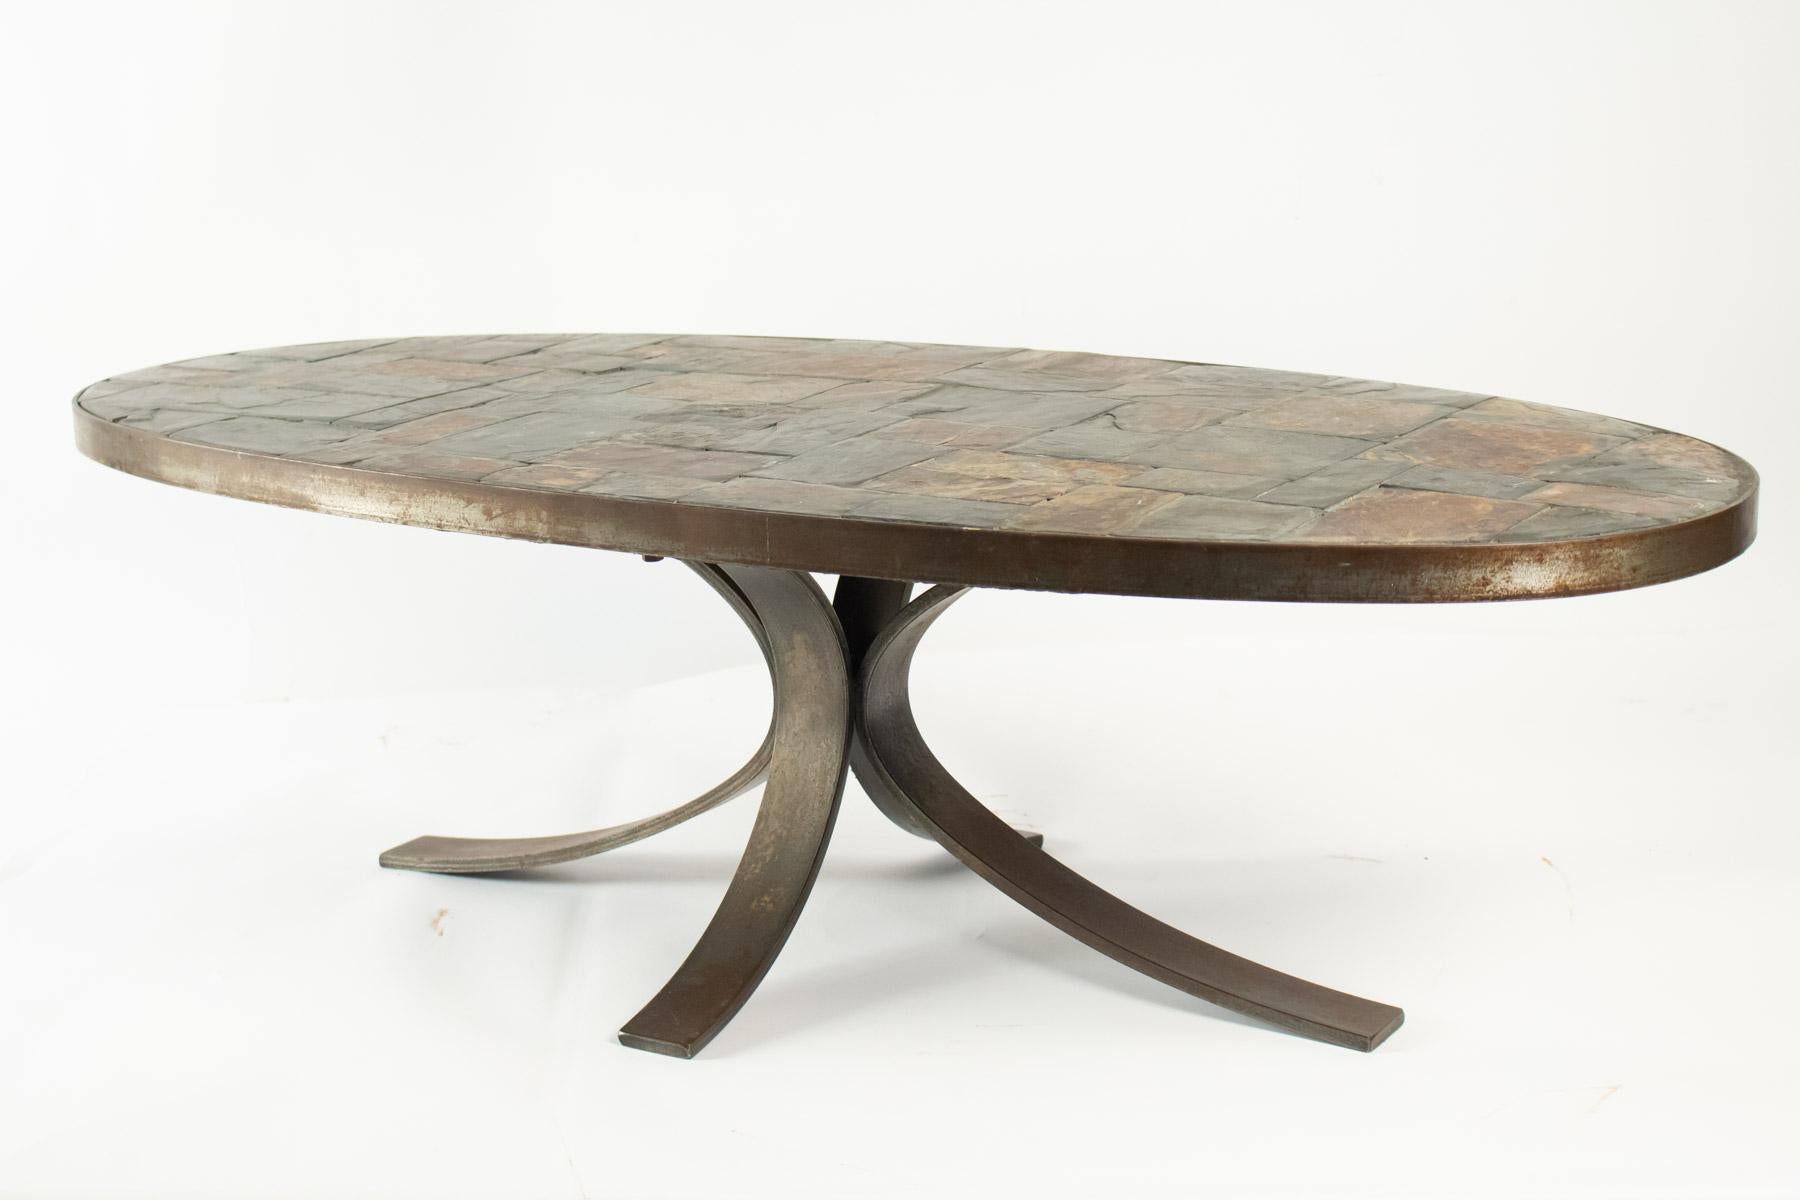 Mid-20th Century Oval Coffee Table in Wrought Iron and Stone from the Ardoise Mid-Century Modern